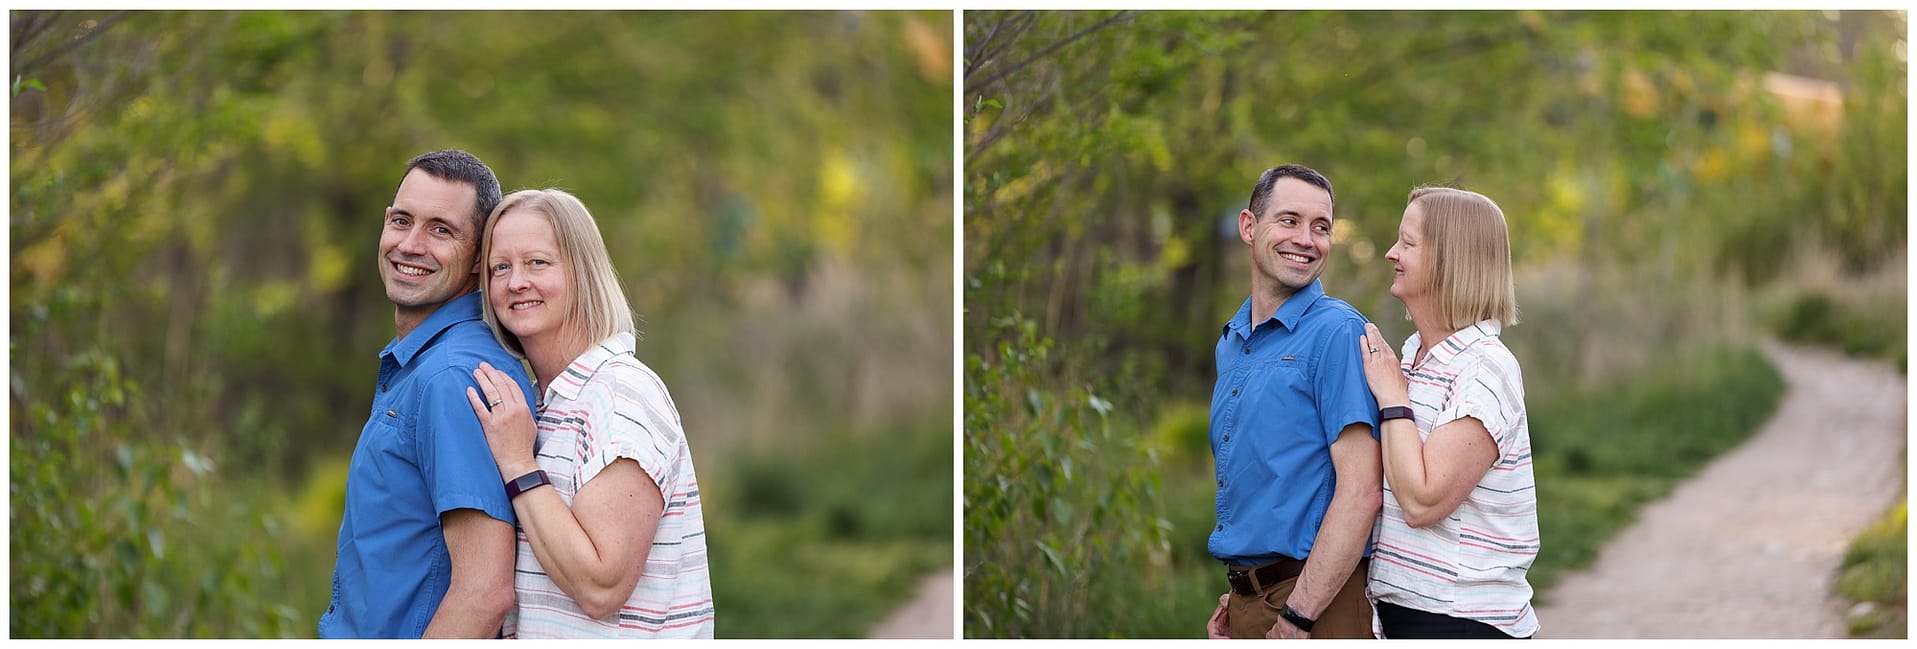 Mom & Dad sneak off for a photo. Photos by Tiffany Hix Photography.